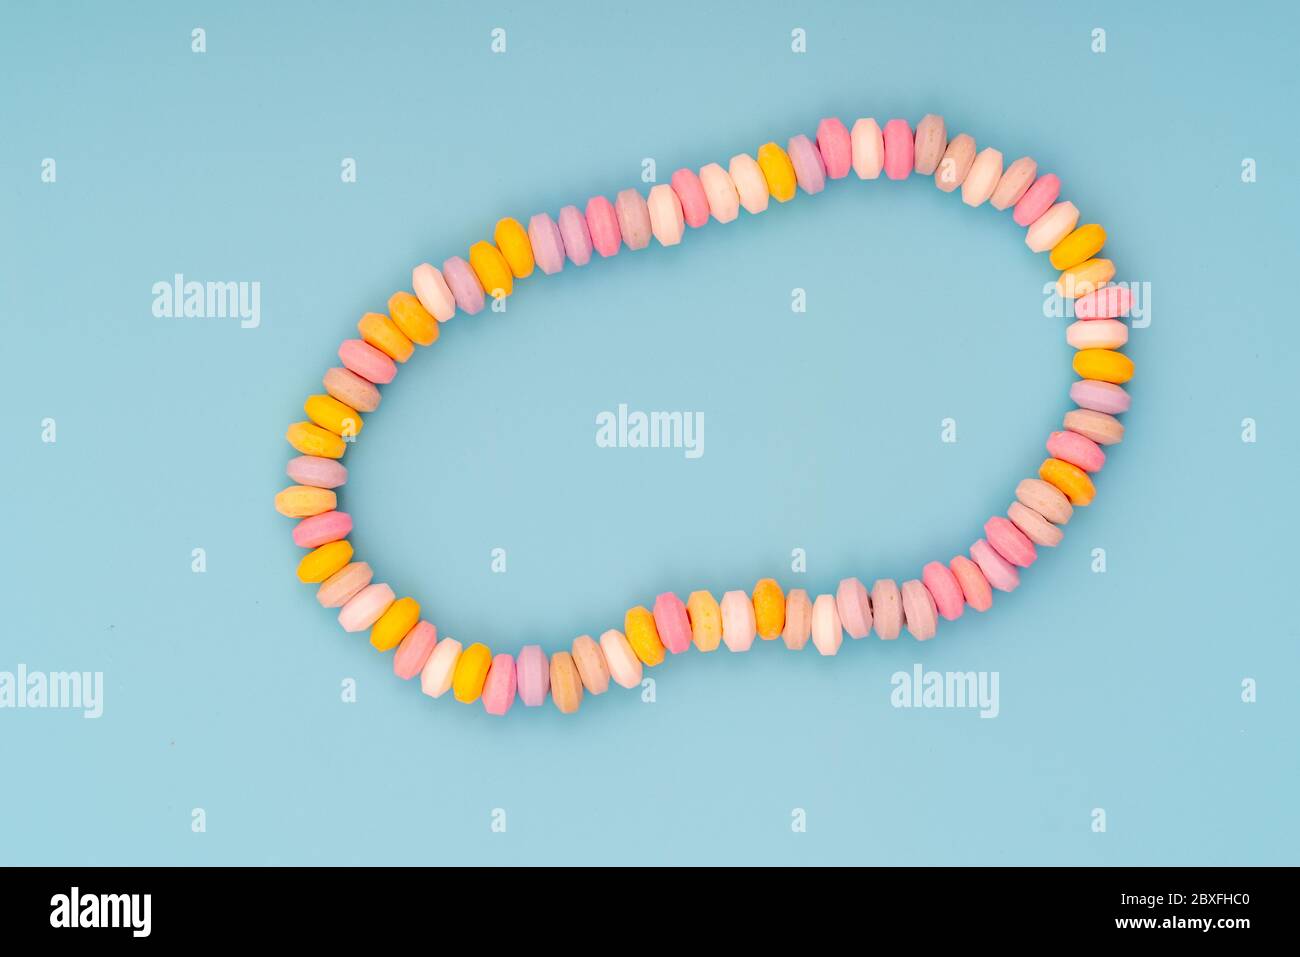 sweets Beads and bracelets candy on a pink background Stock Photo